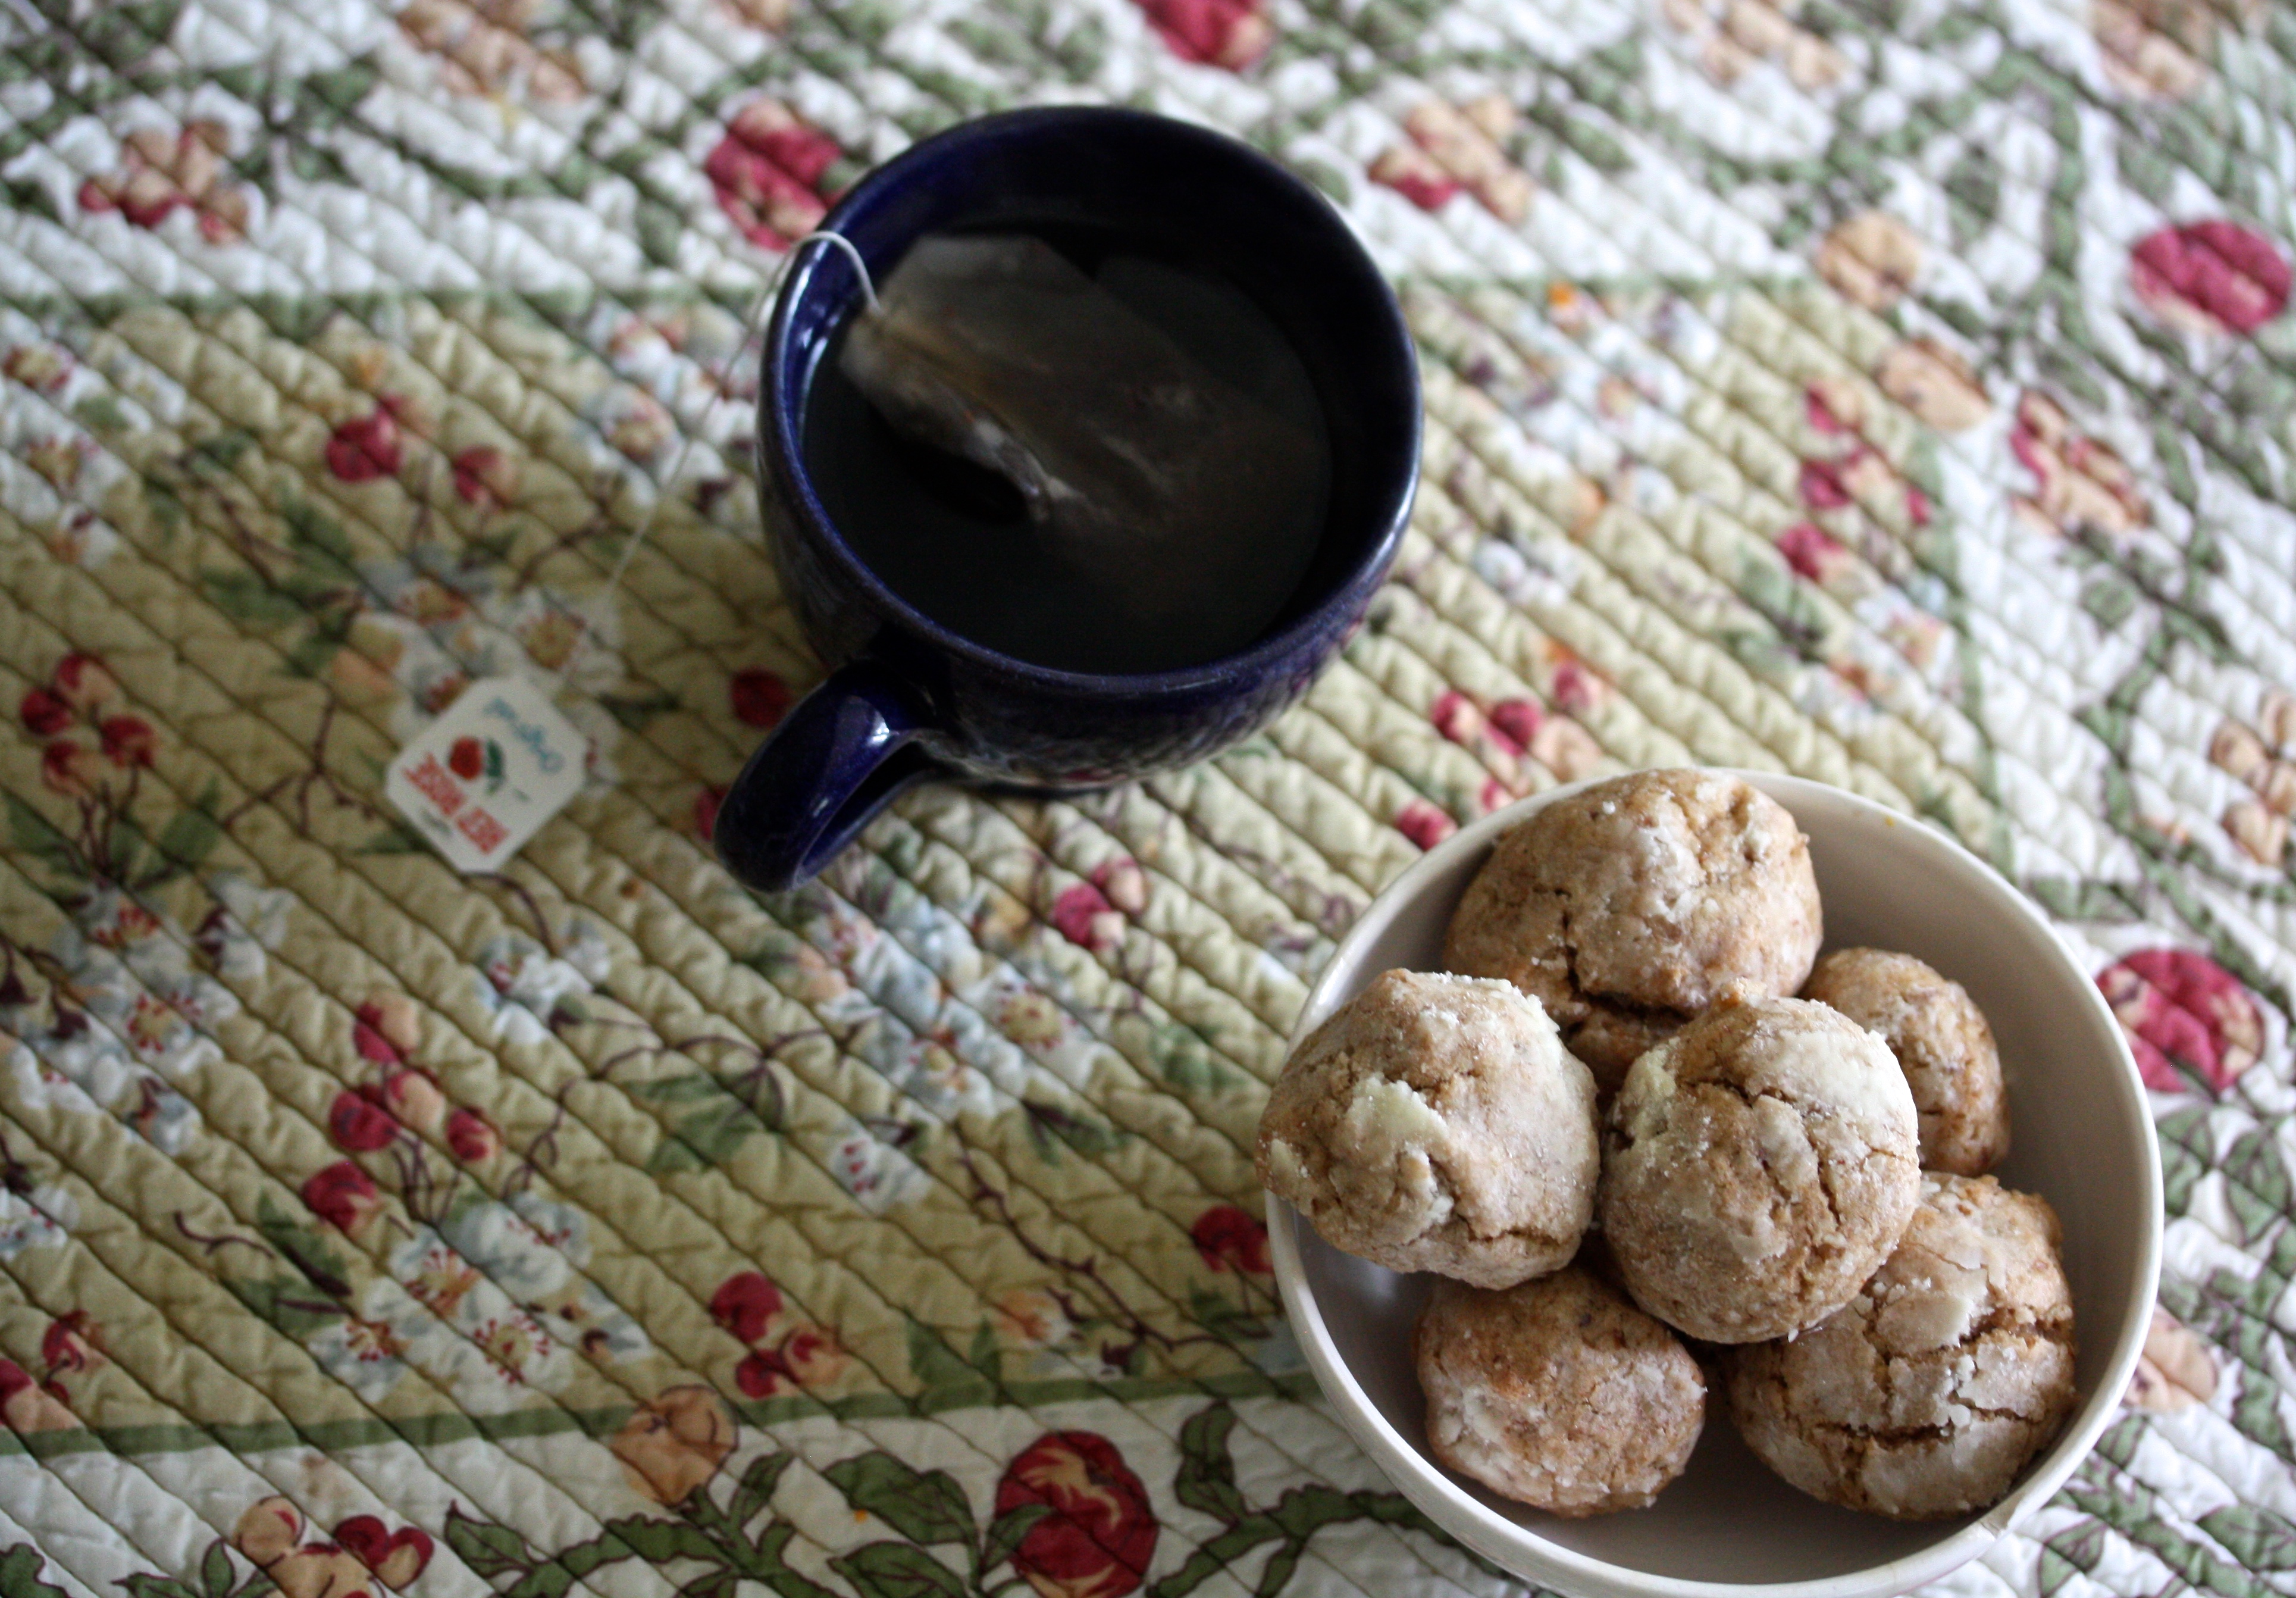 A bowl of ghriba cookies and a cup of tea.